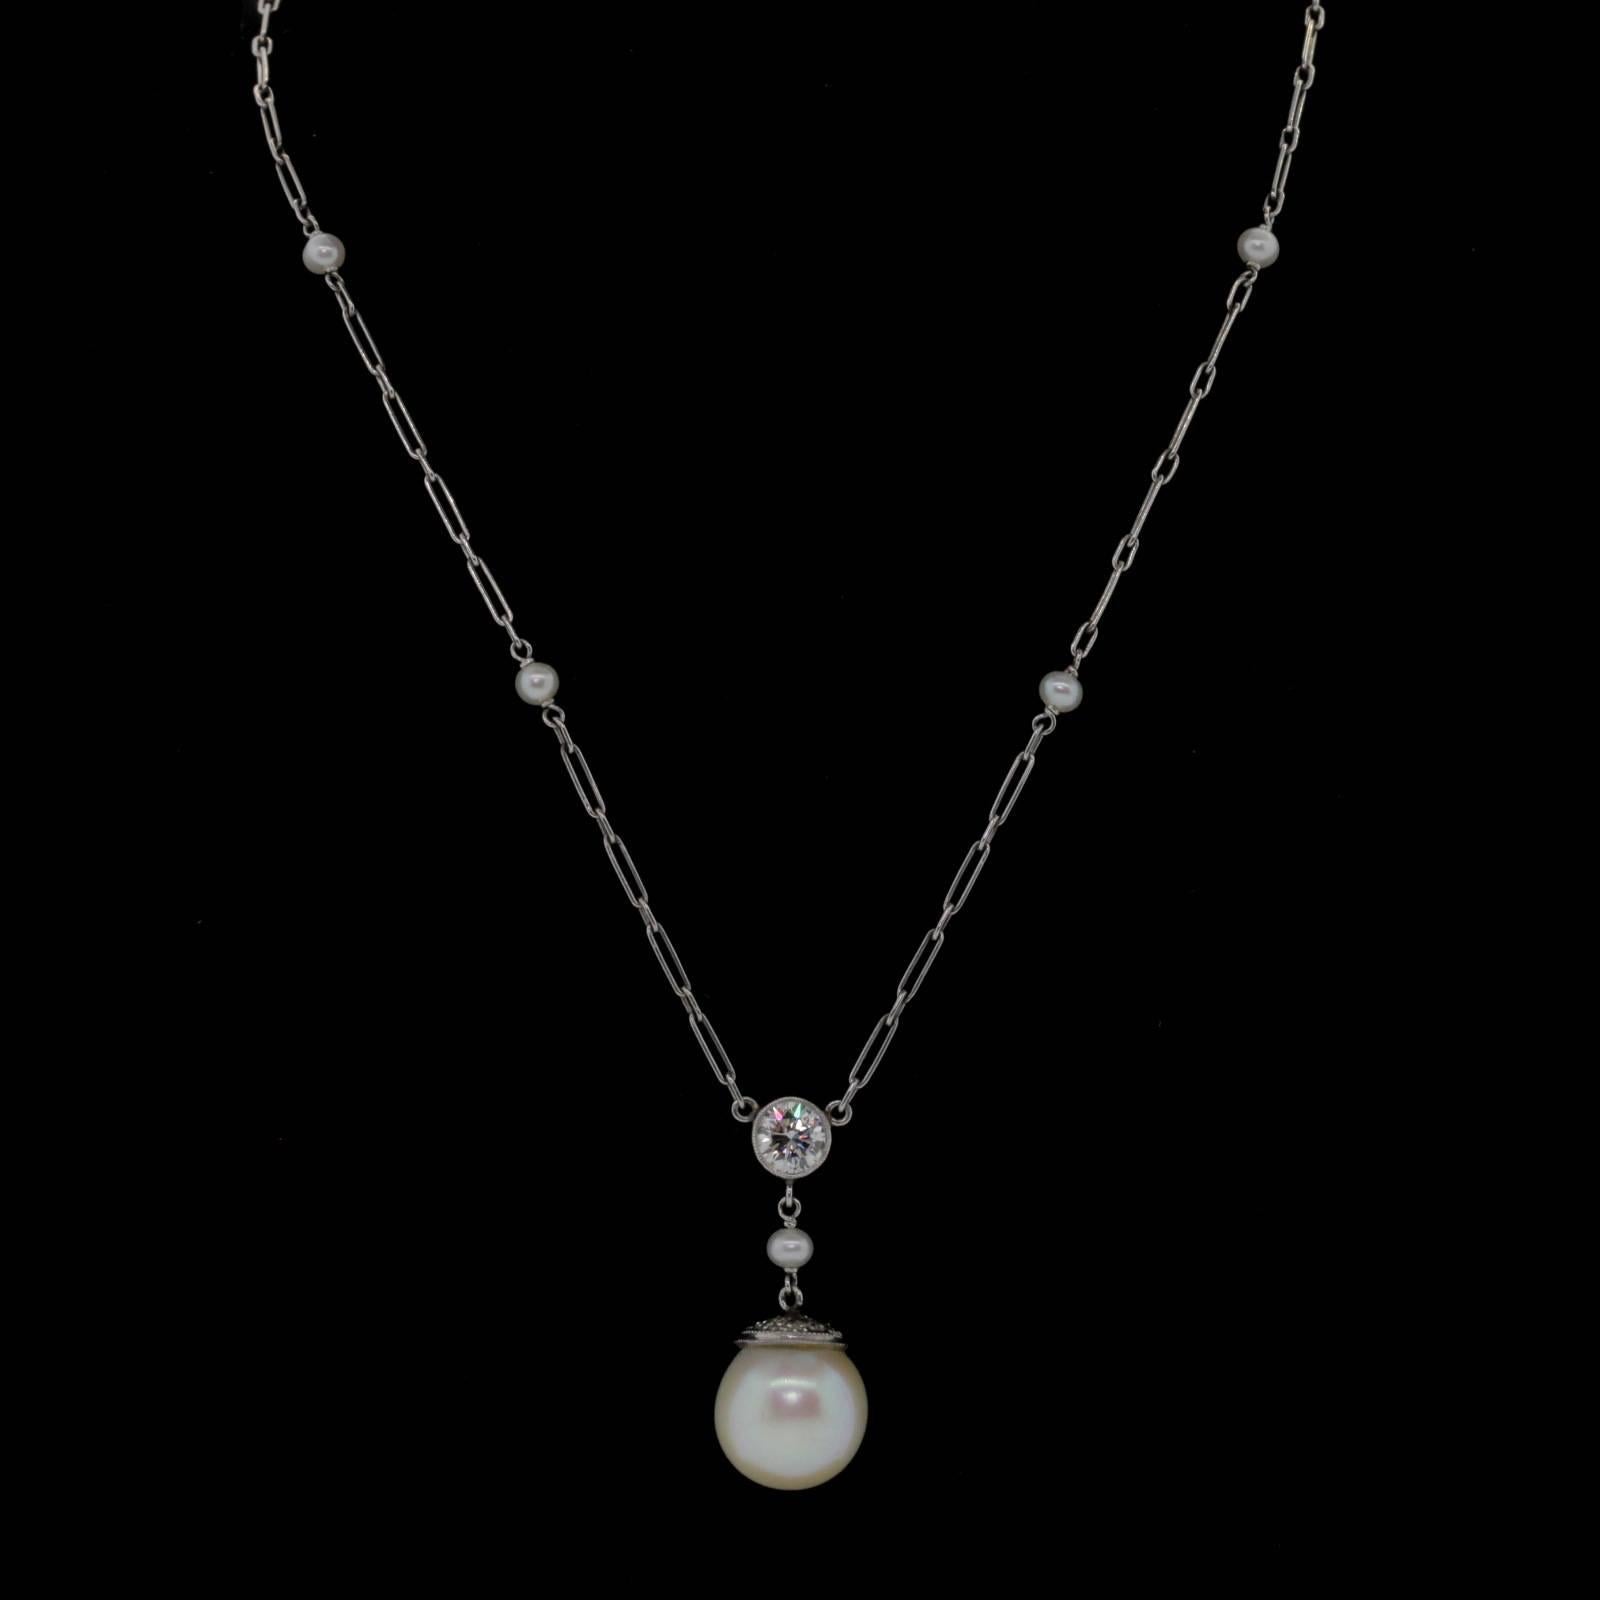 This very wearable platinum pendant necklace features a bezel set 0.45 carat Round Brilliant cut Diamond, hanging from a handmade wire link chain.  A cultured 10.15 mm Pearl with a diamond cap dangles from the diamond.  Completing this lovely